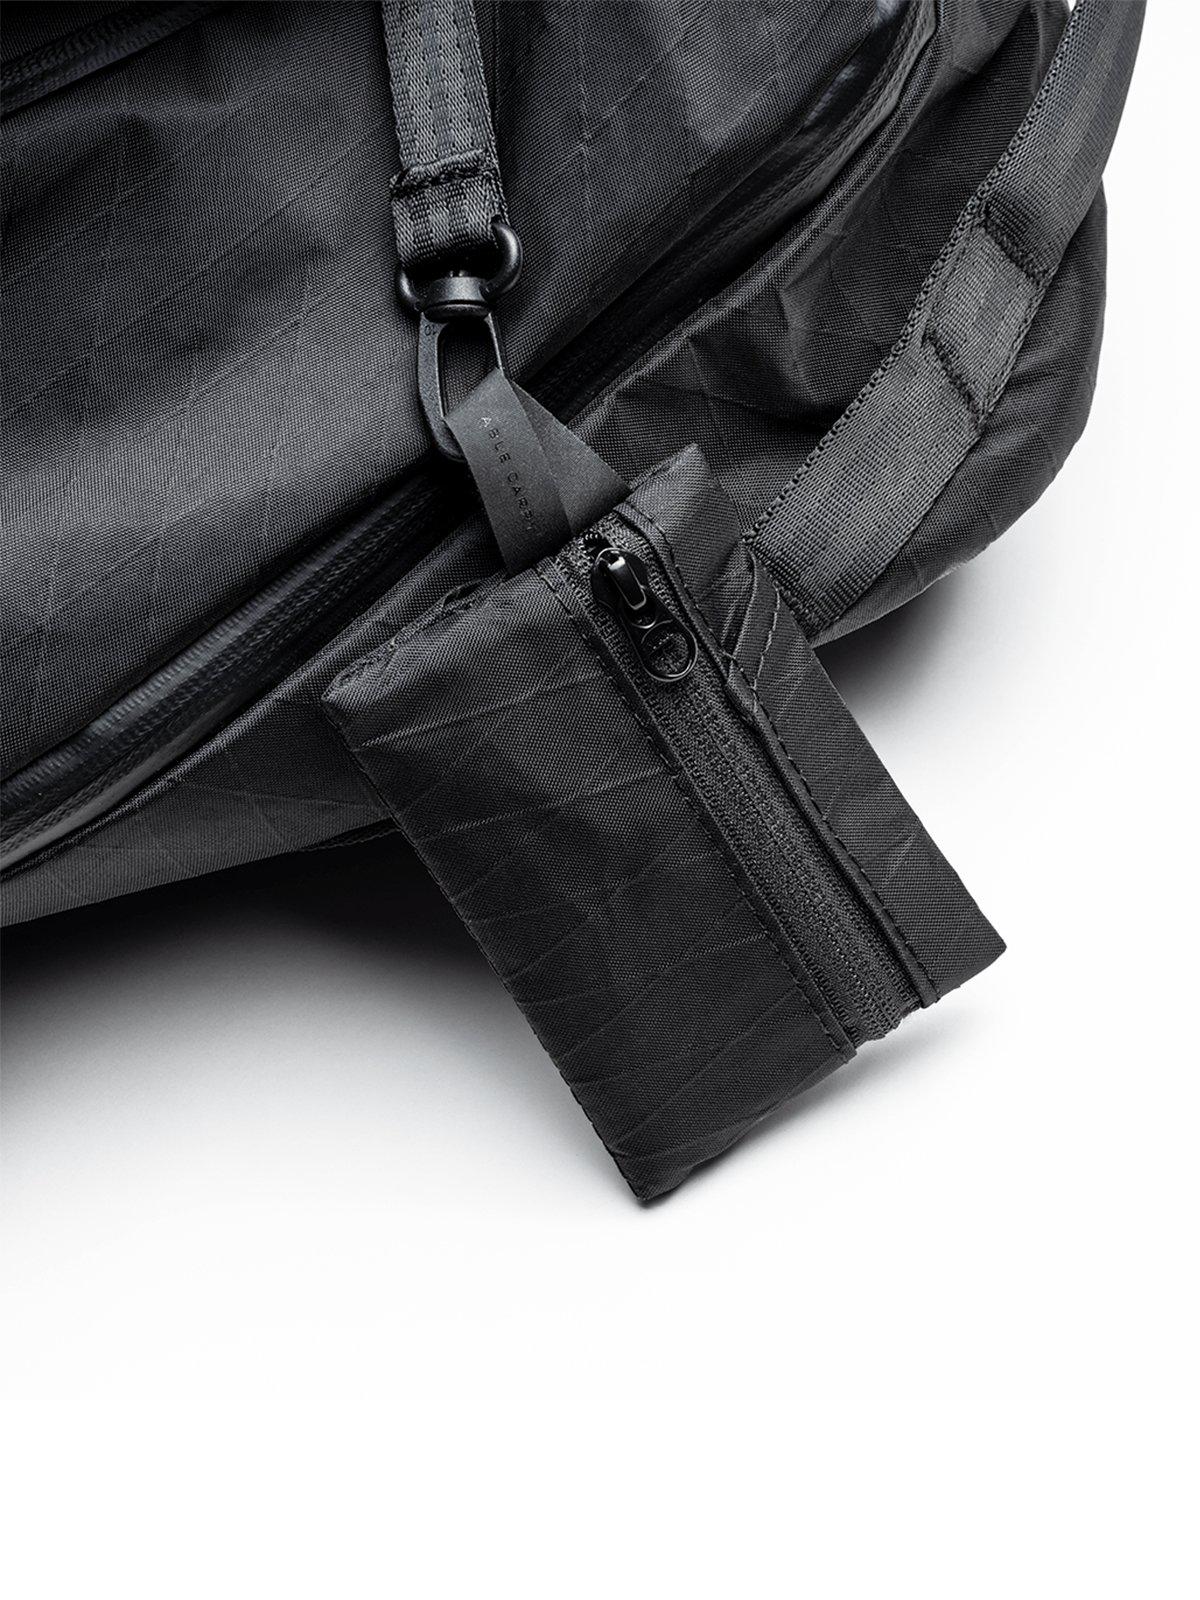 Able Carry Joey Pouch Cordura X-Pac Black